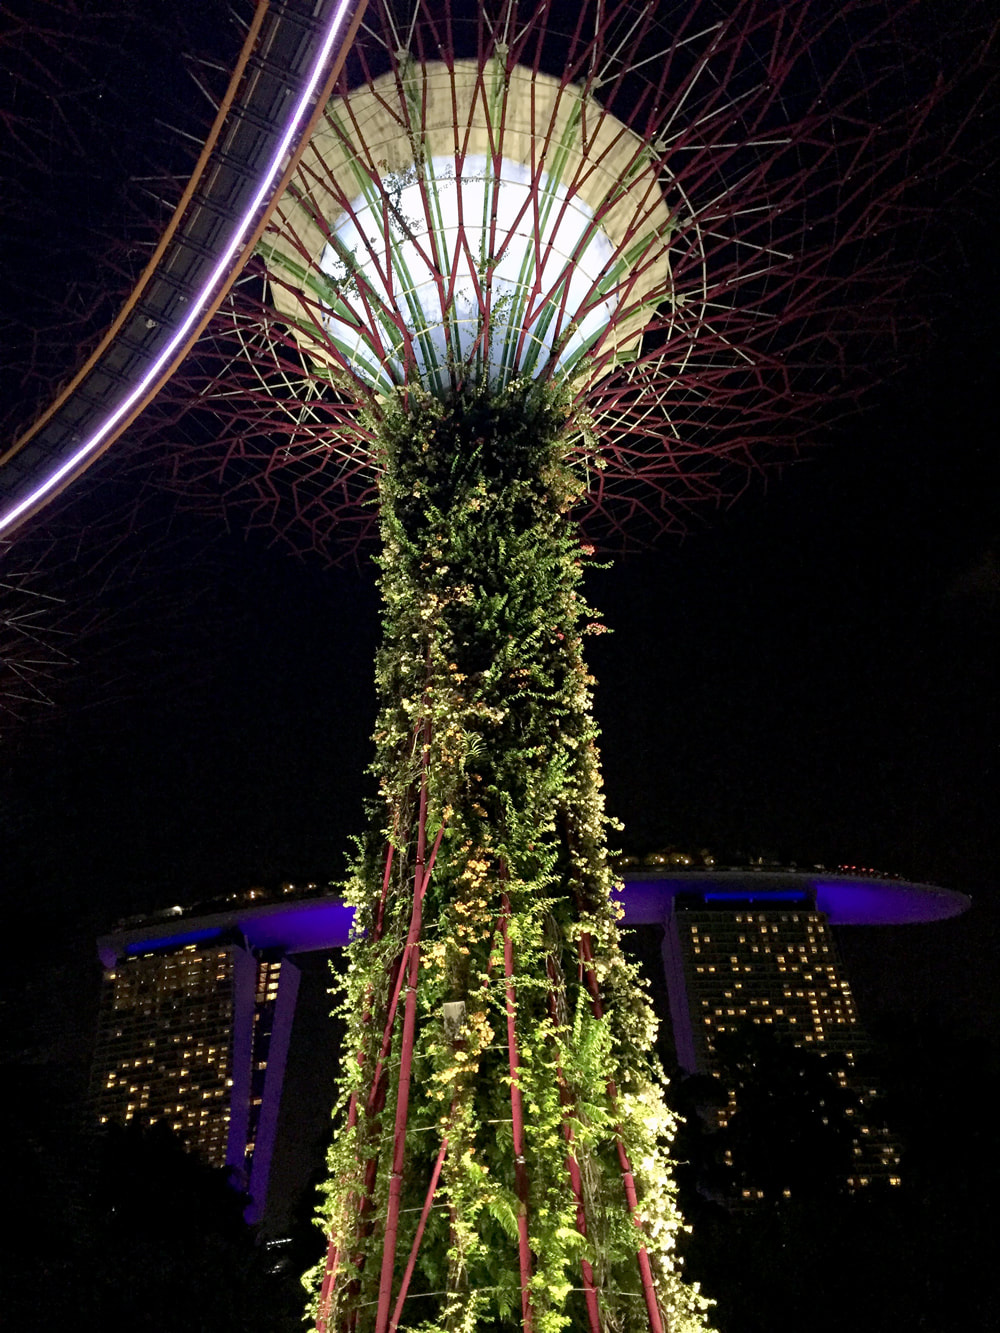 Vertical gardens of Supertree Grove and OCBC Skyway with Marina Bay Sands in the background - Gardens by the Bay, Singapore.